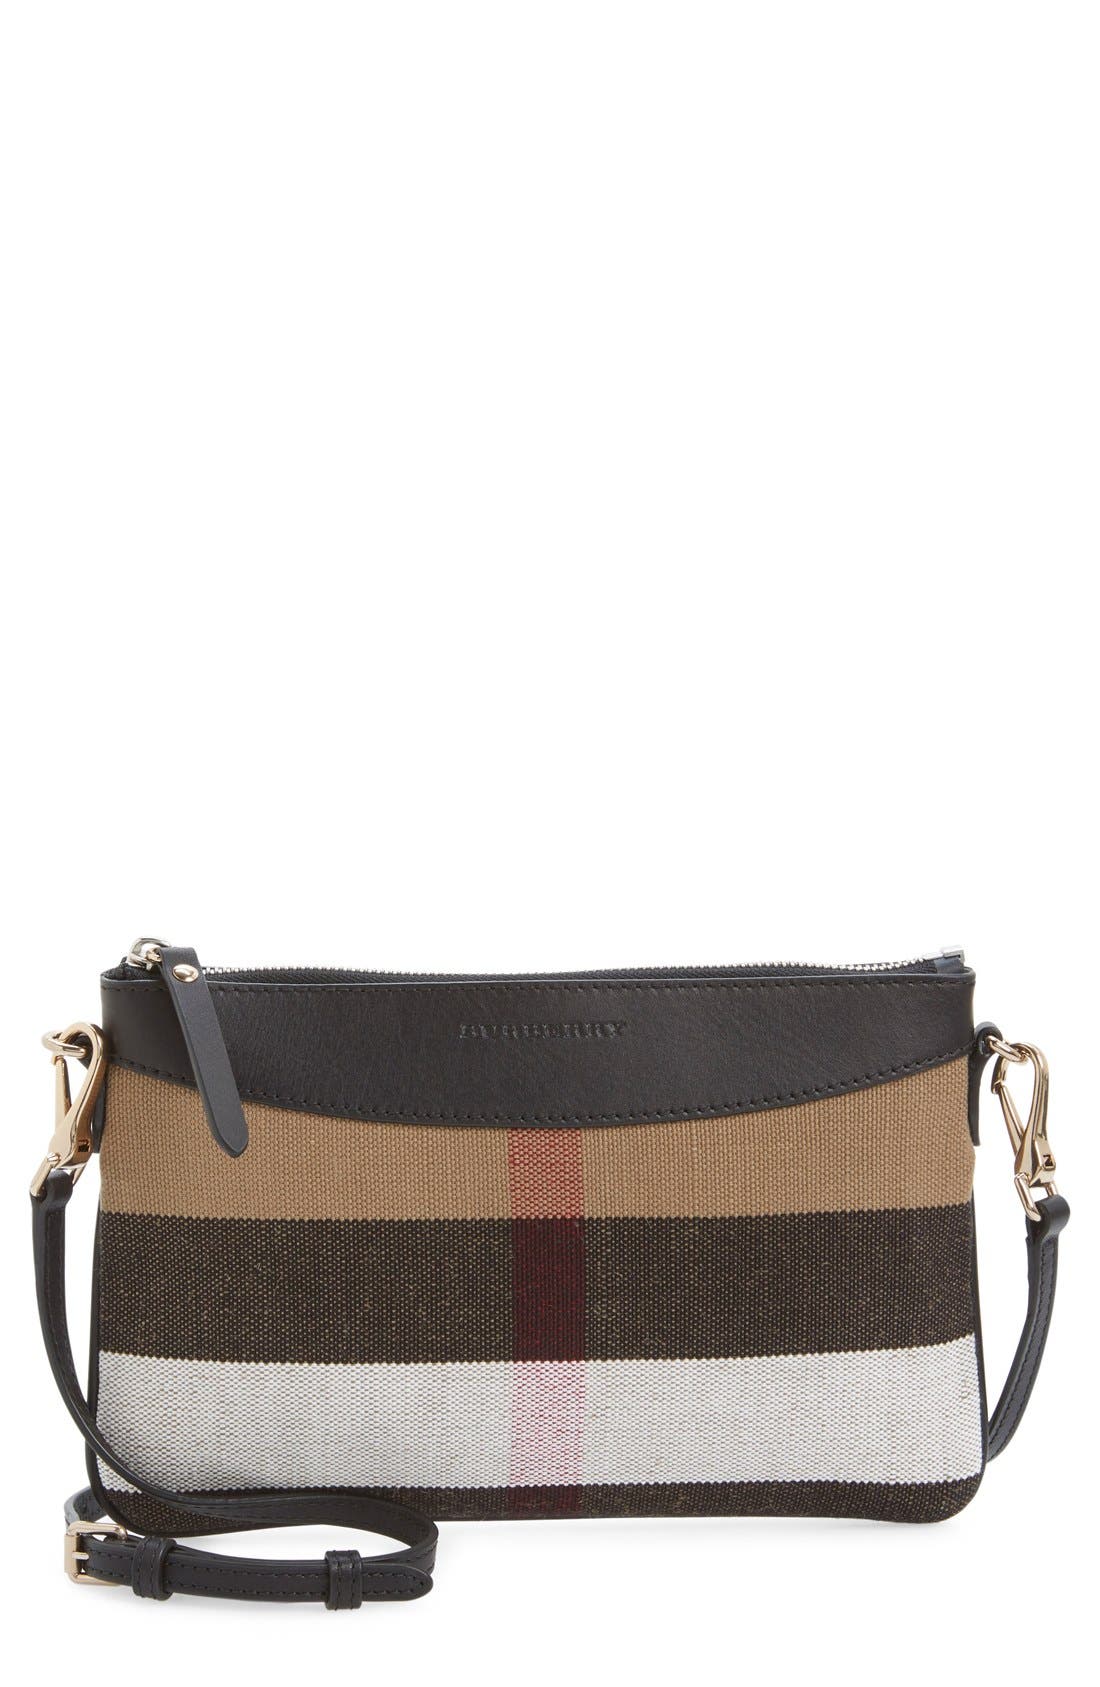 burberry bags nordstrom